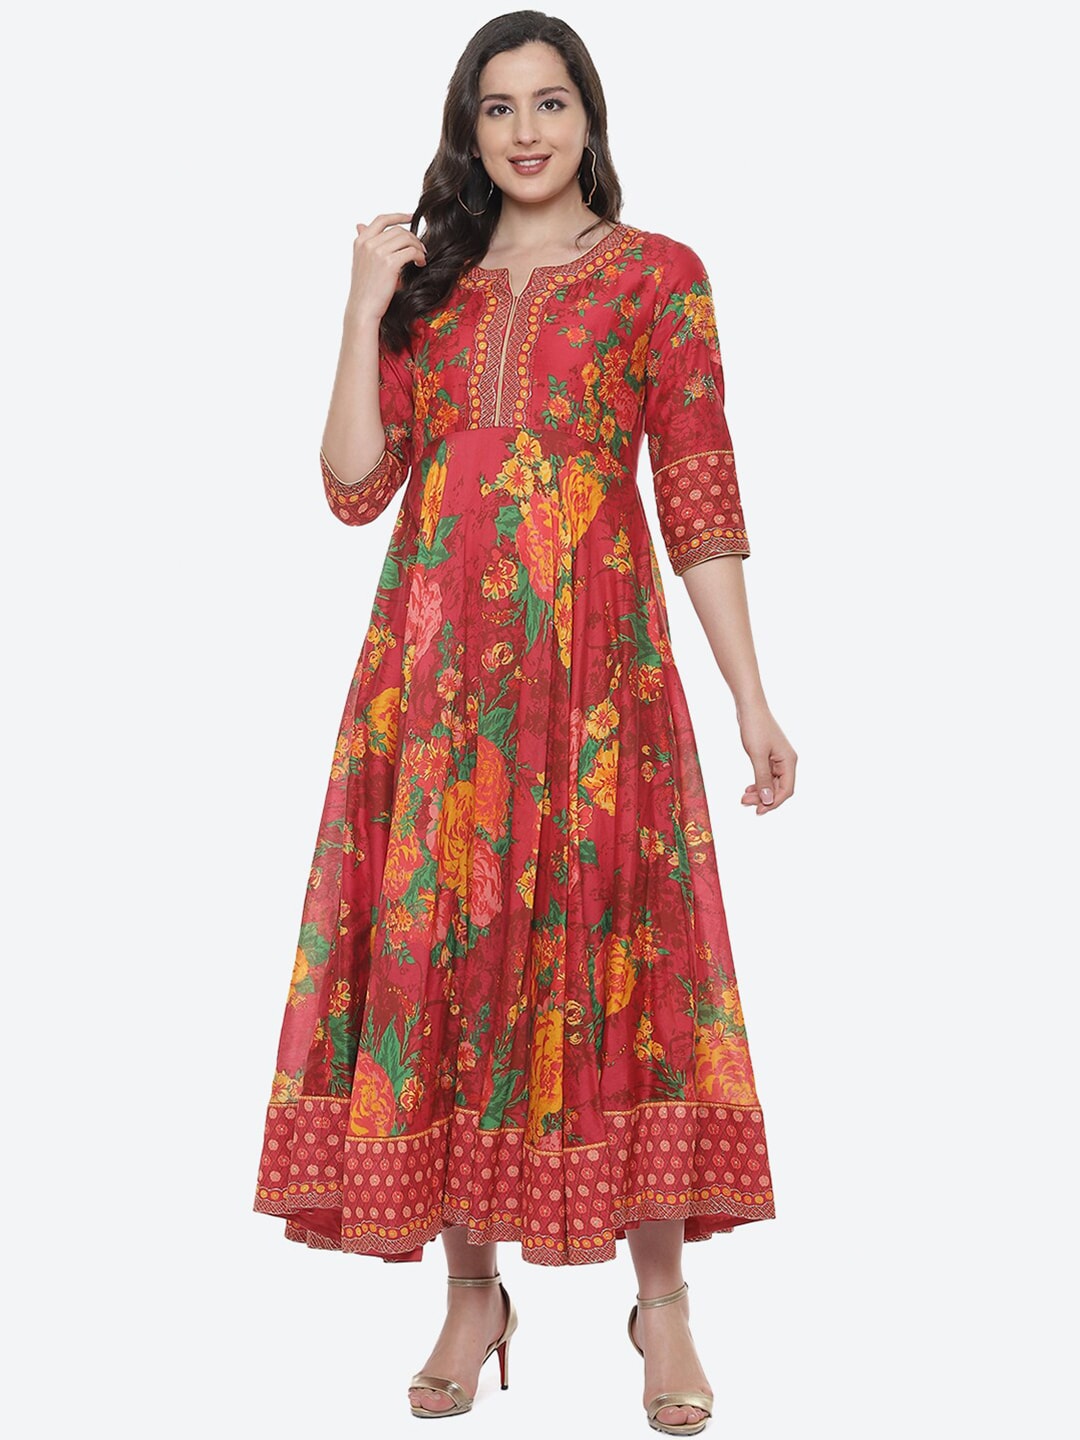 Biba Red Floral Maxi Dress Price in India